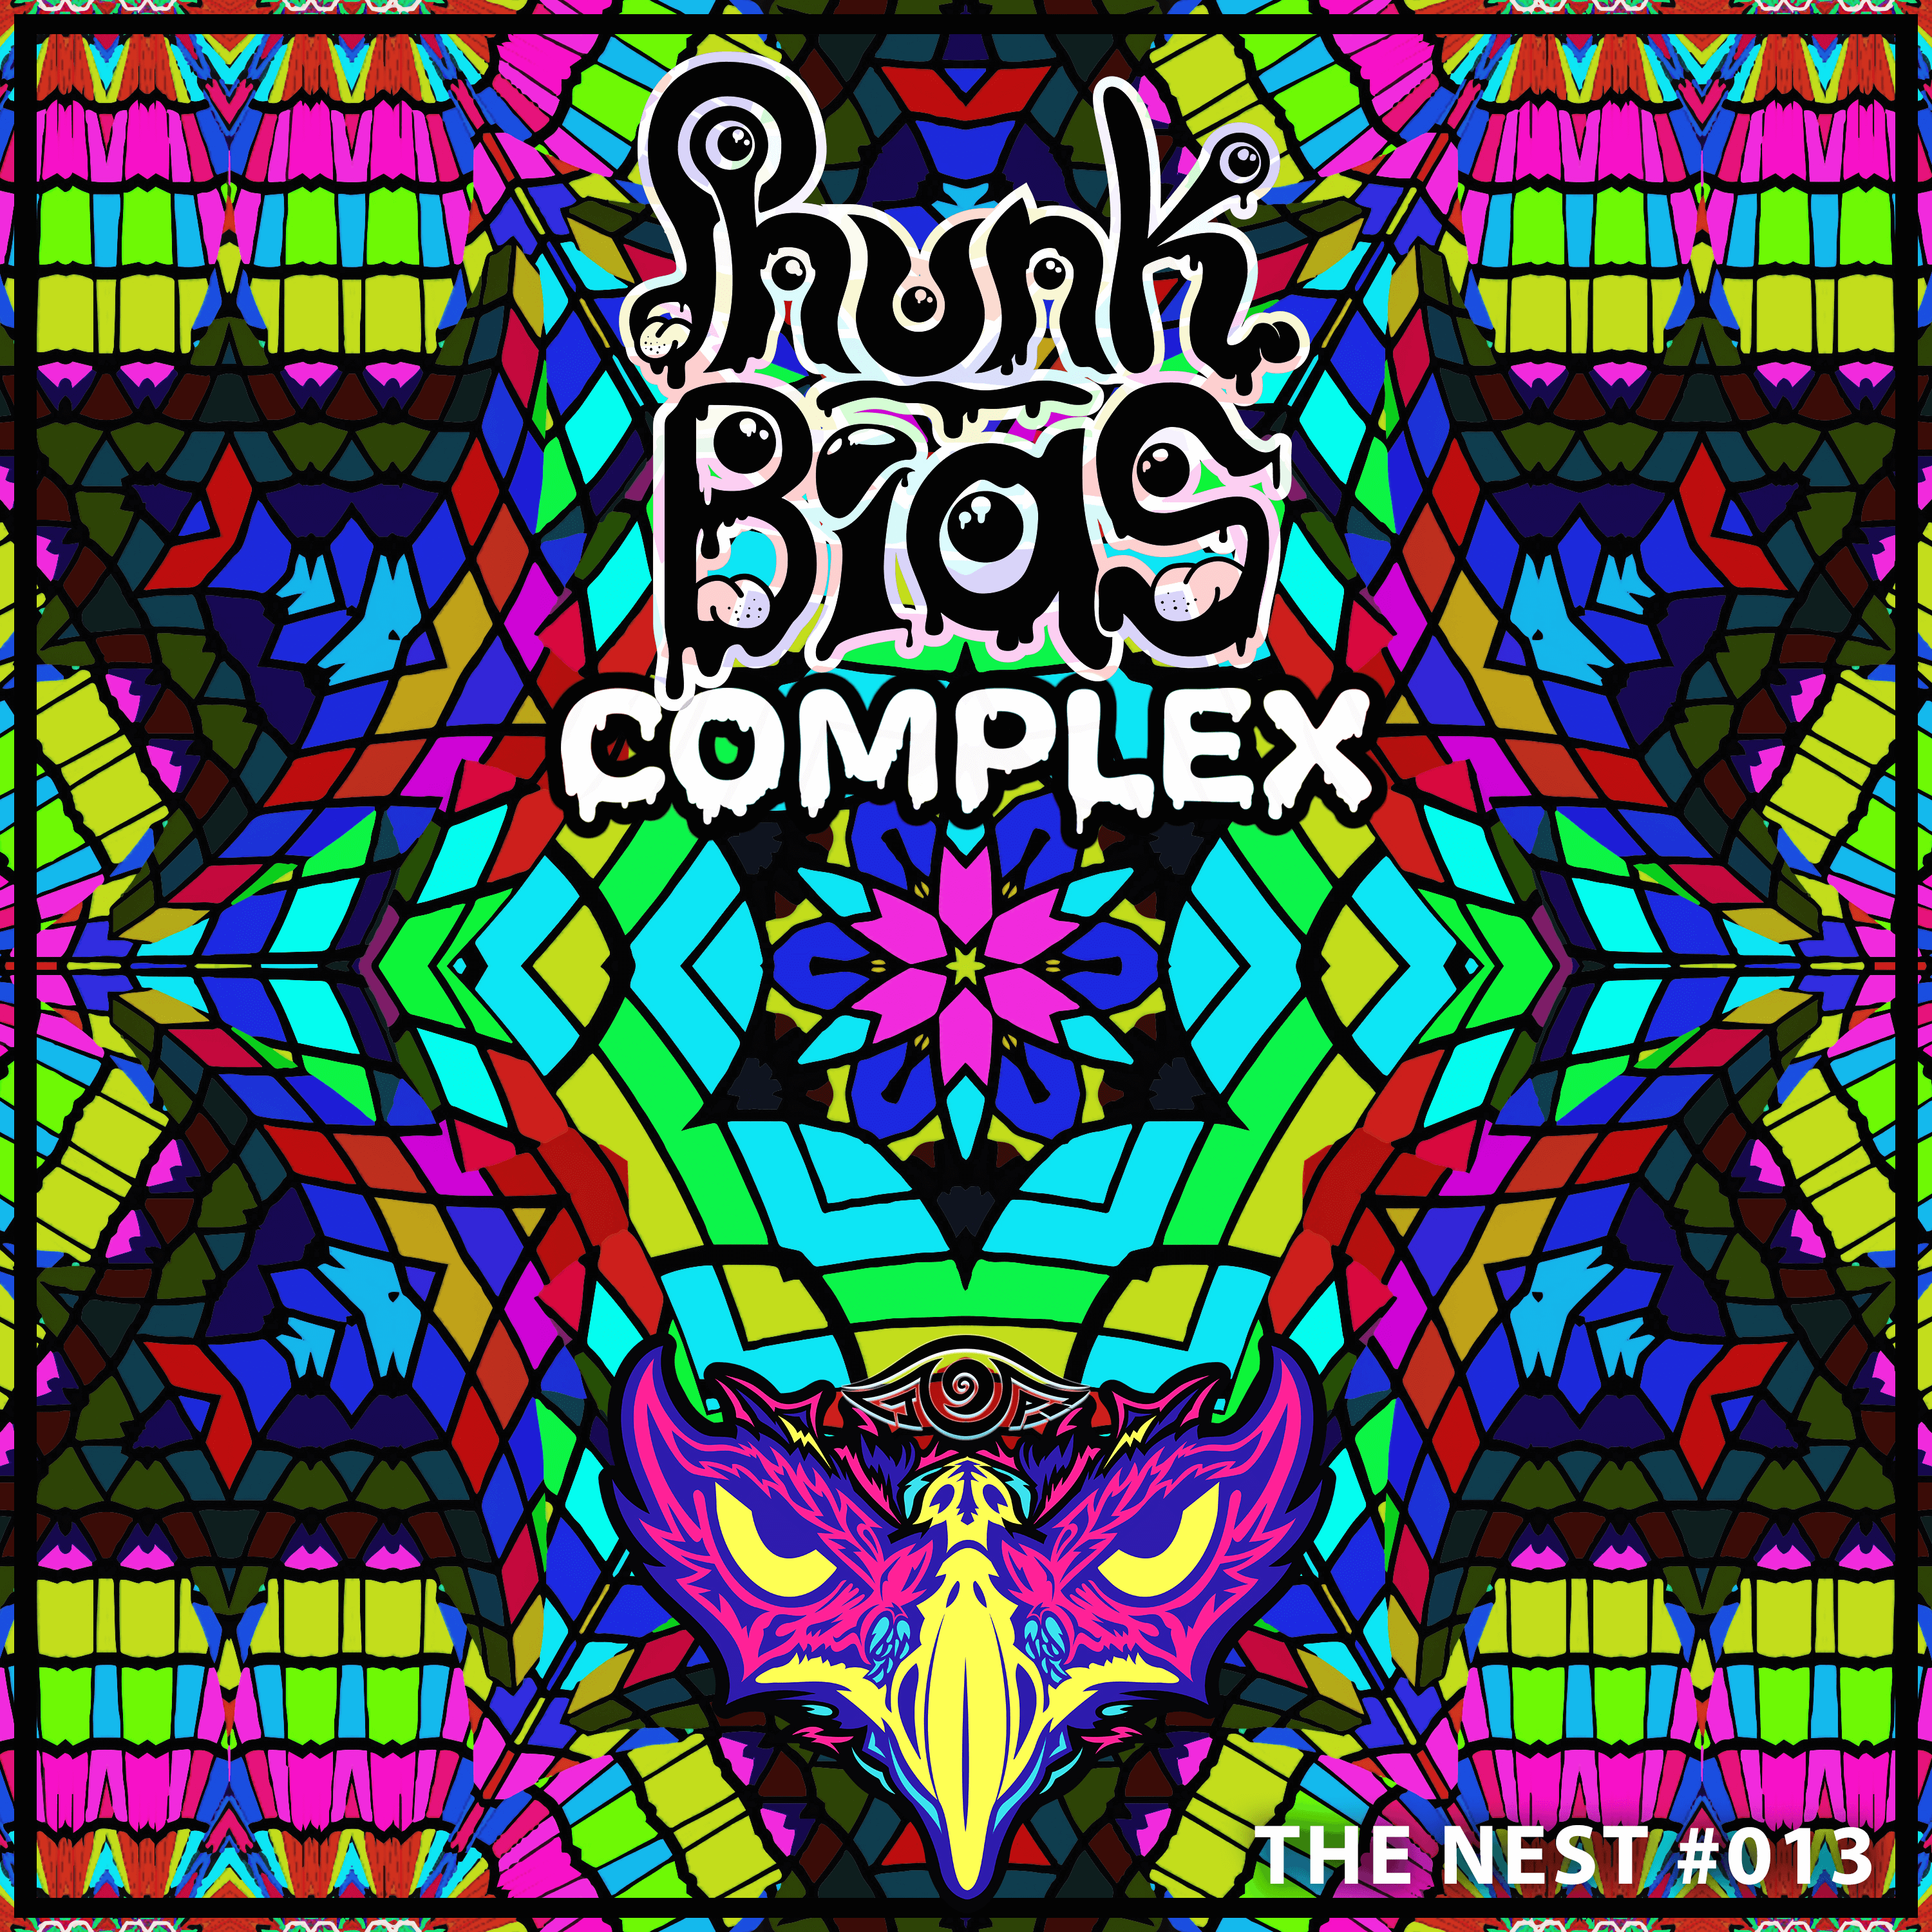 Complexity Meets Simplicity On Phunk Bias’ New Single